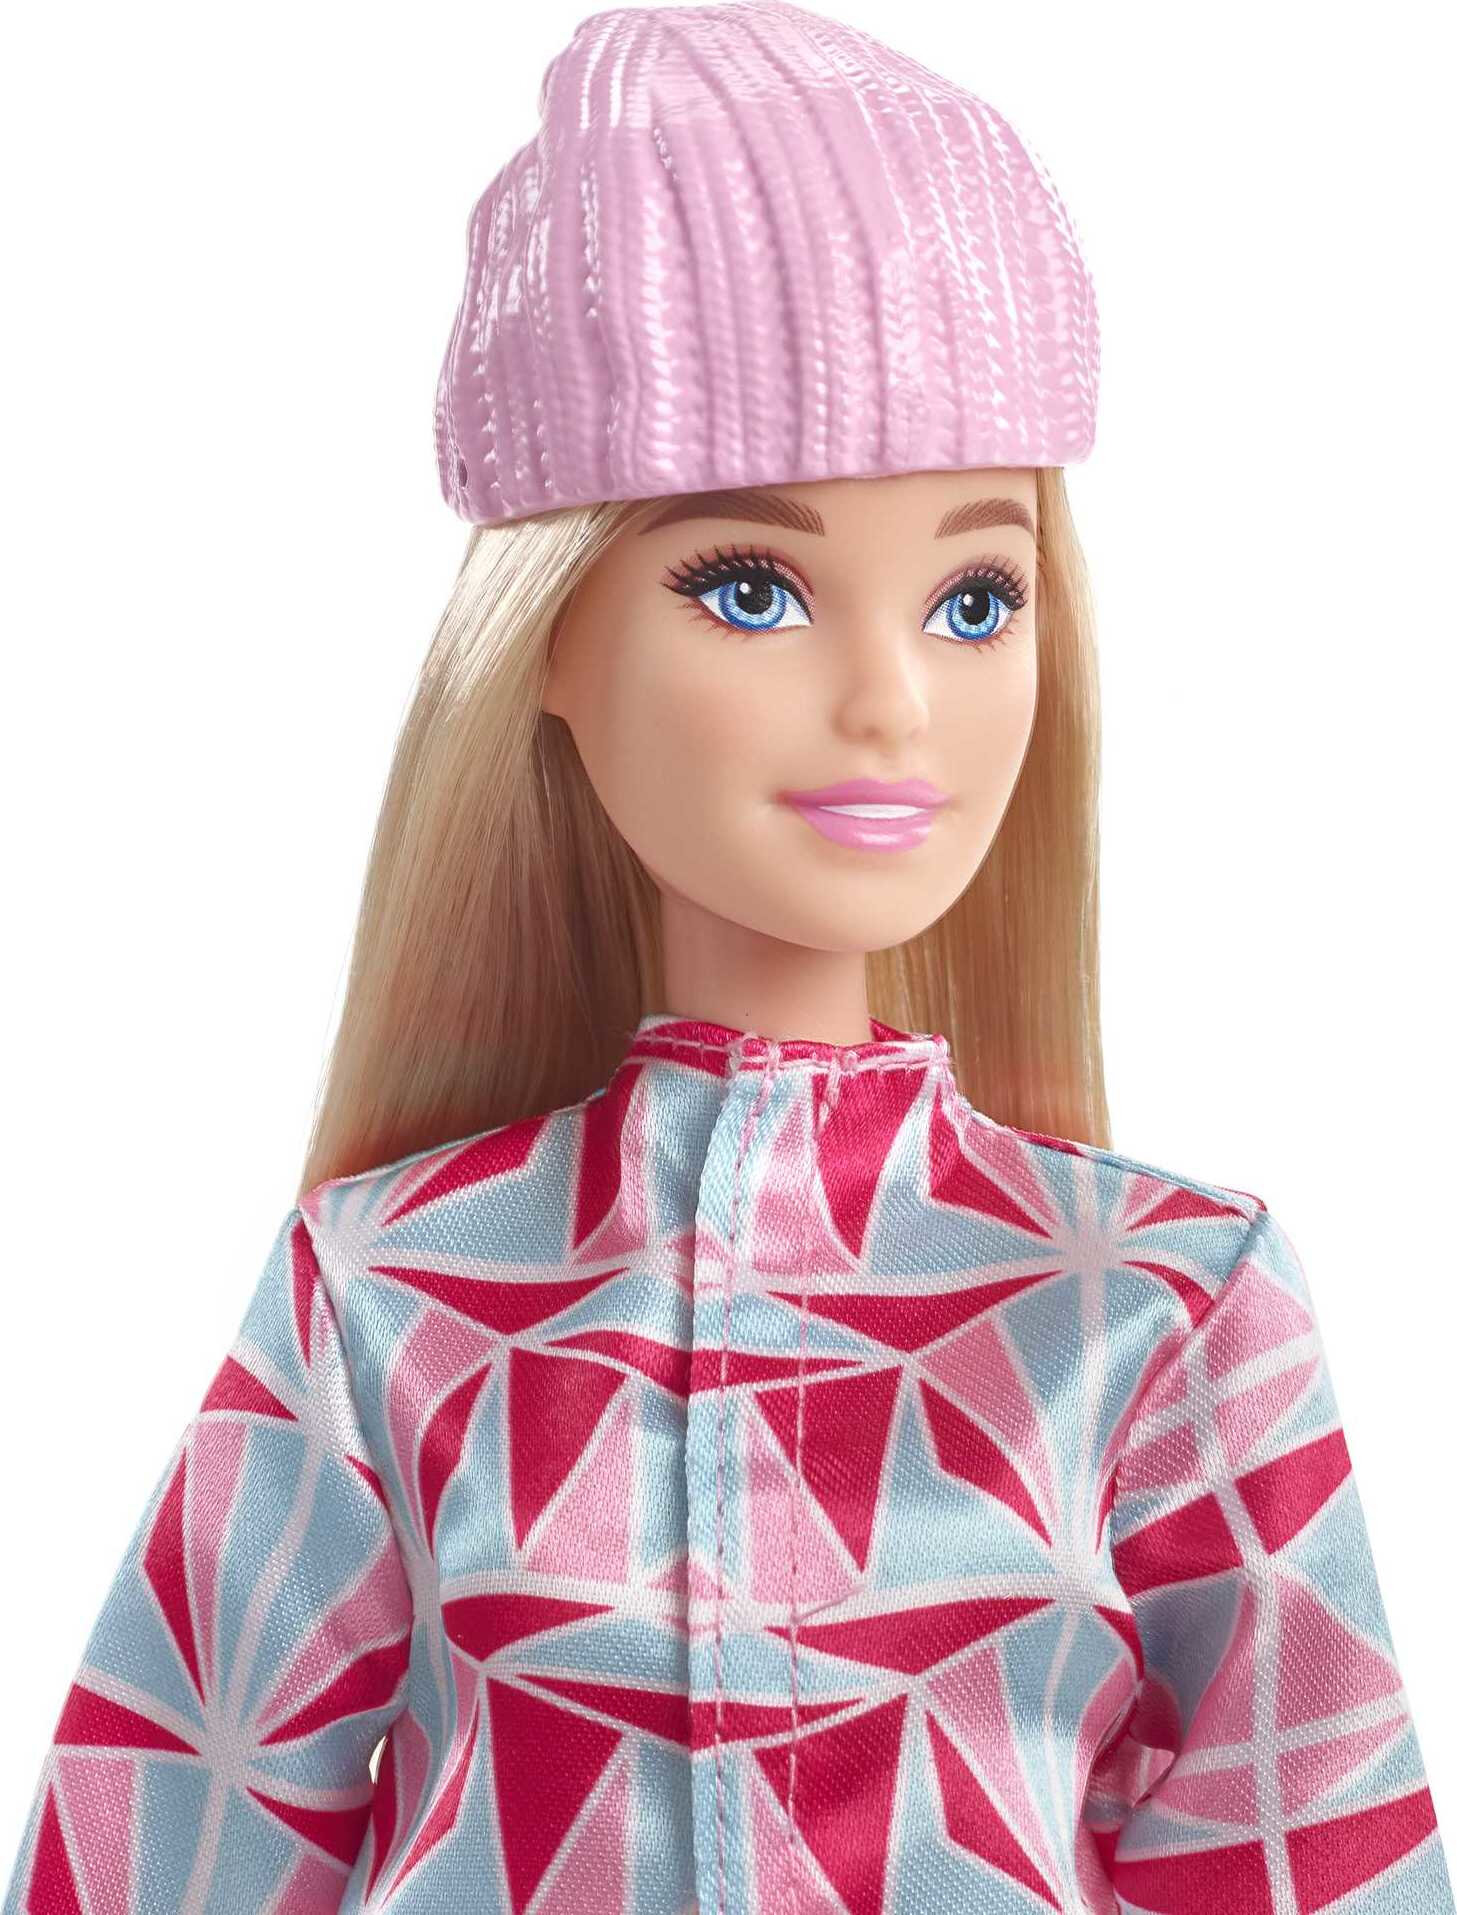 Barbie Snowboarder Fashion Doll Dressed in Jacket, Pants & Helmet, with Blonde Hair - image 2 of 6